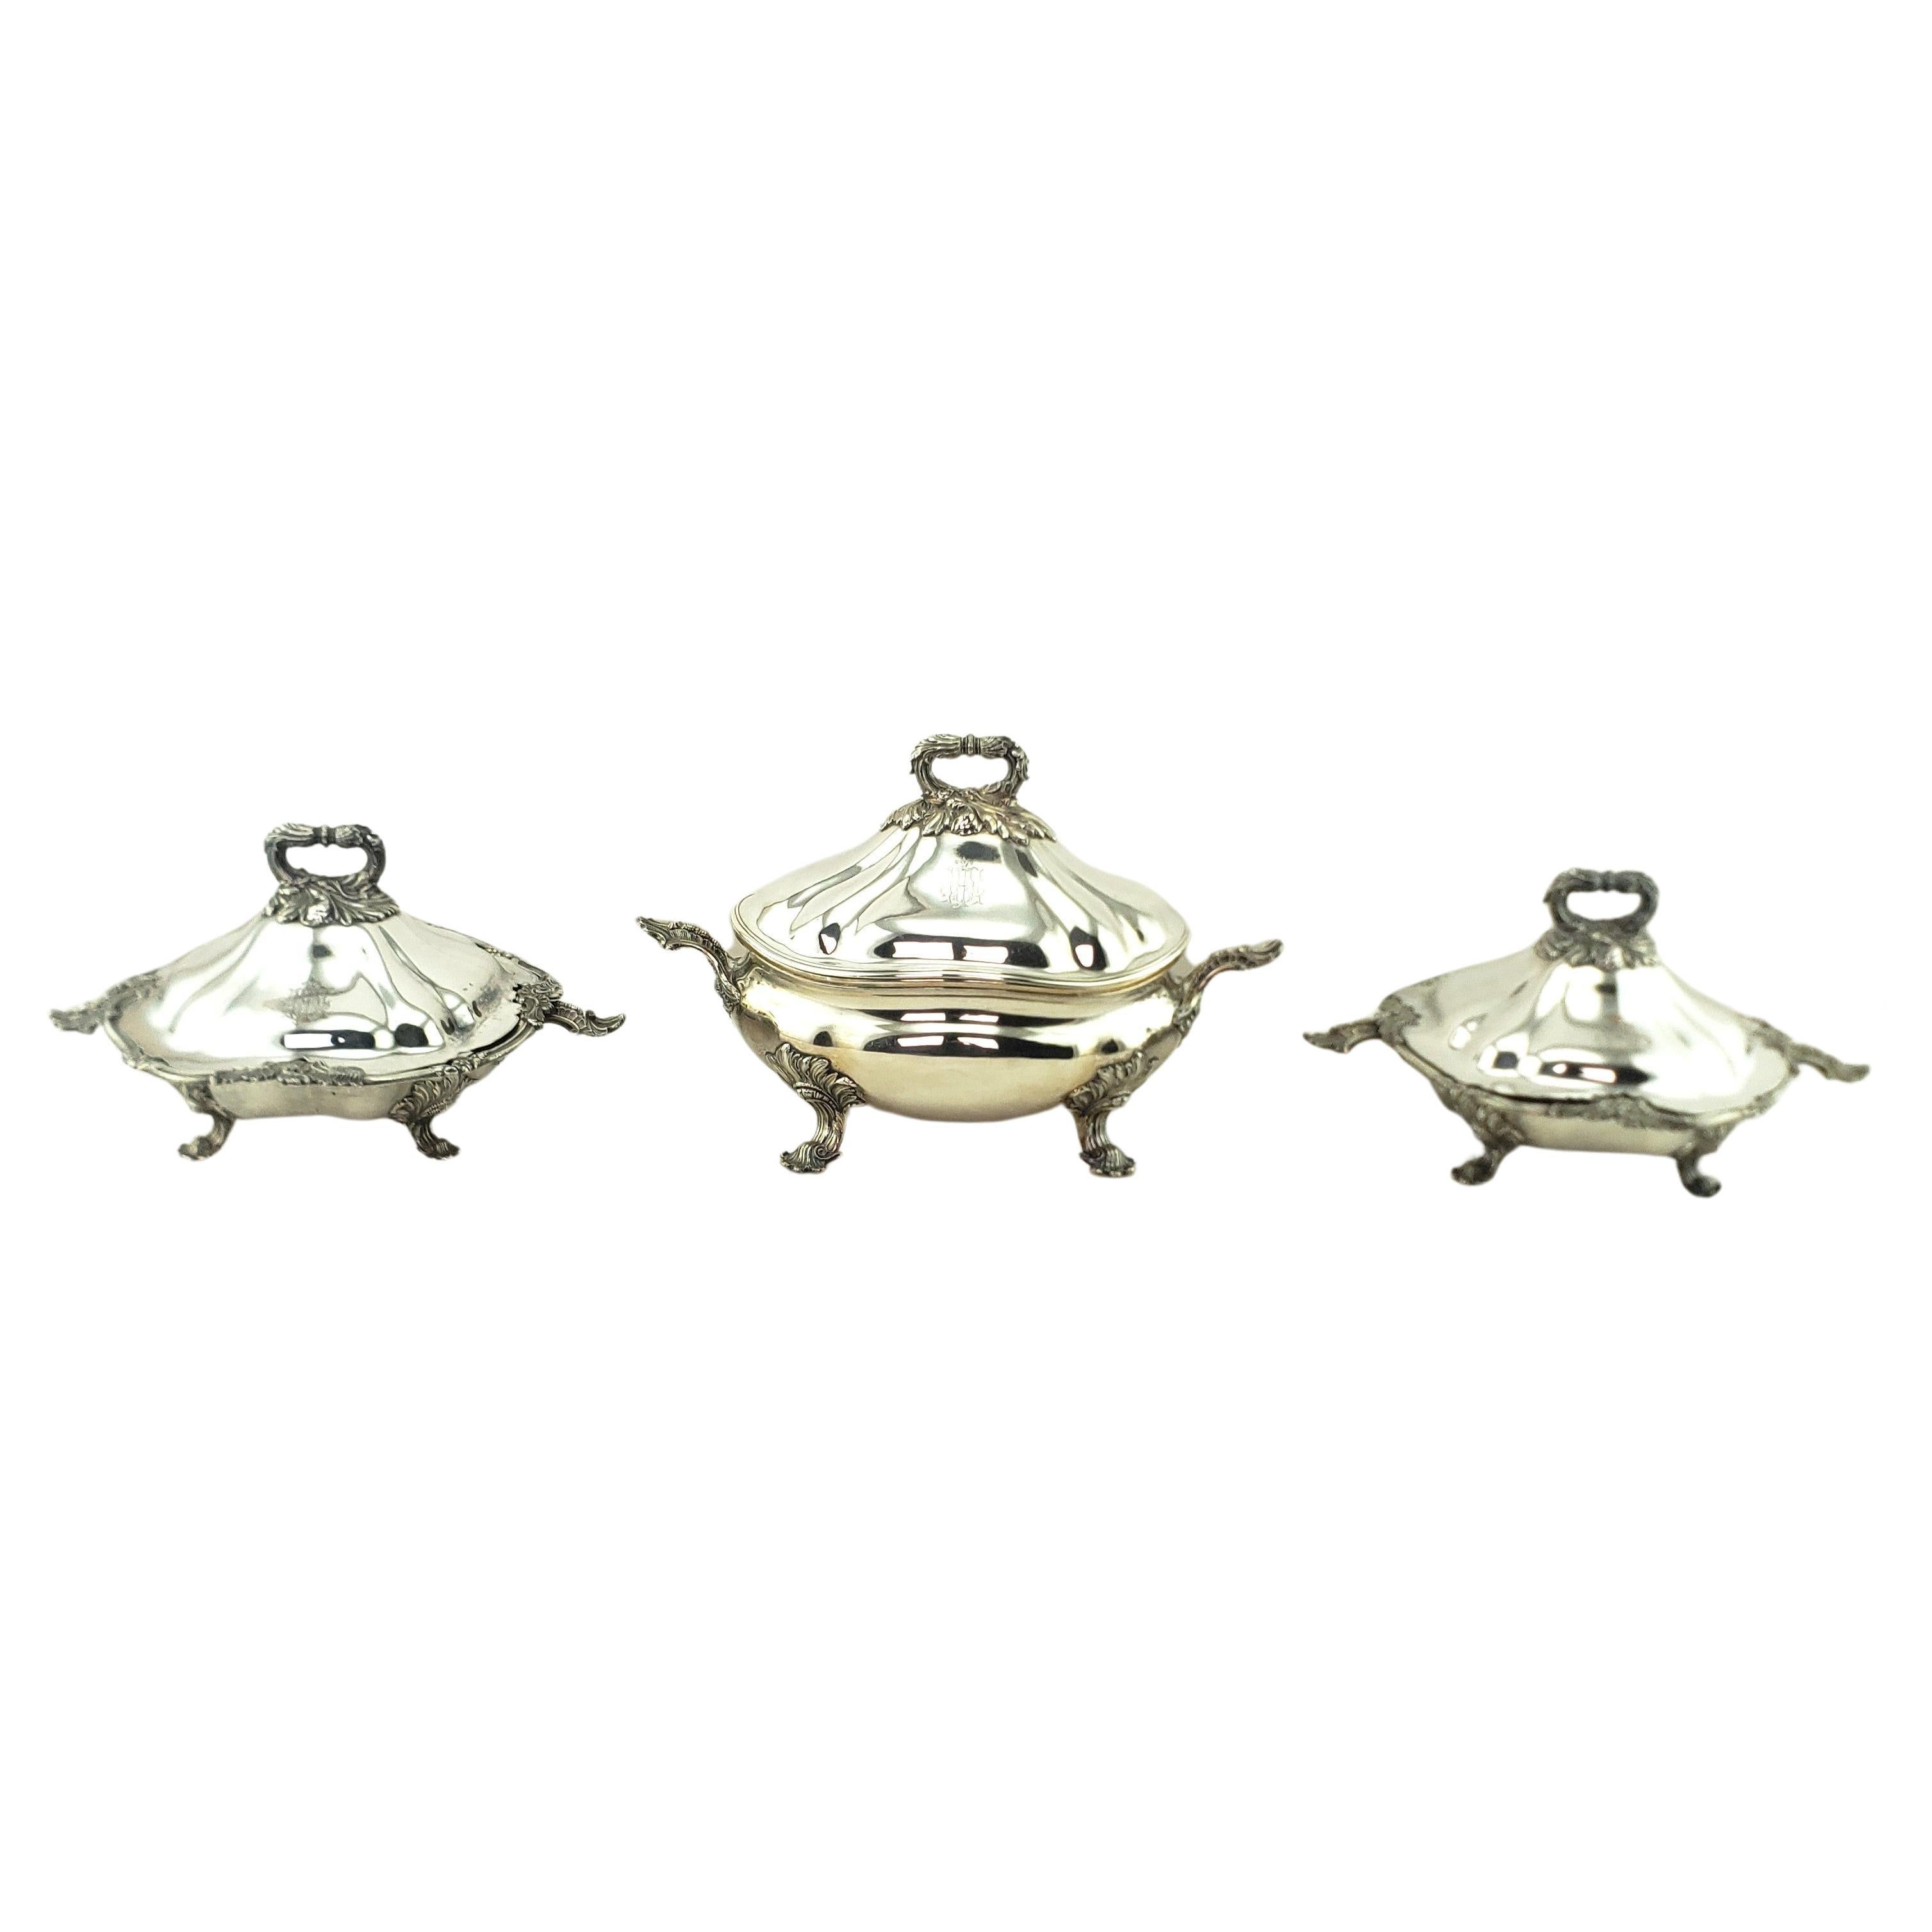 Three Antique Georgian Sheffield Plated Covered Tureens with Floral Decoration For Sale